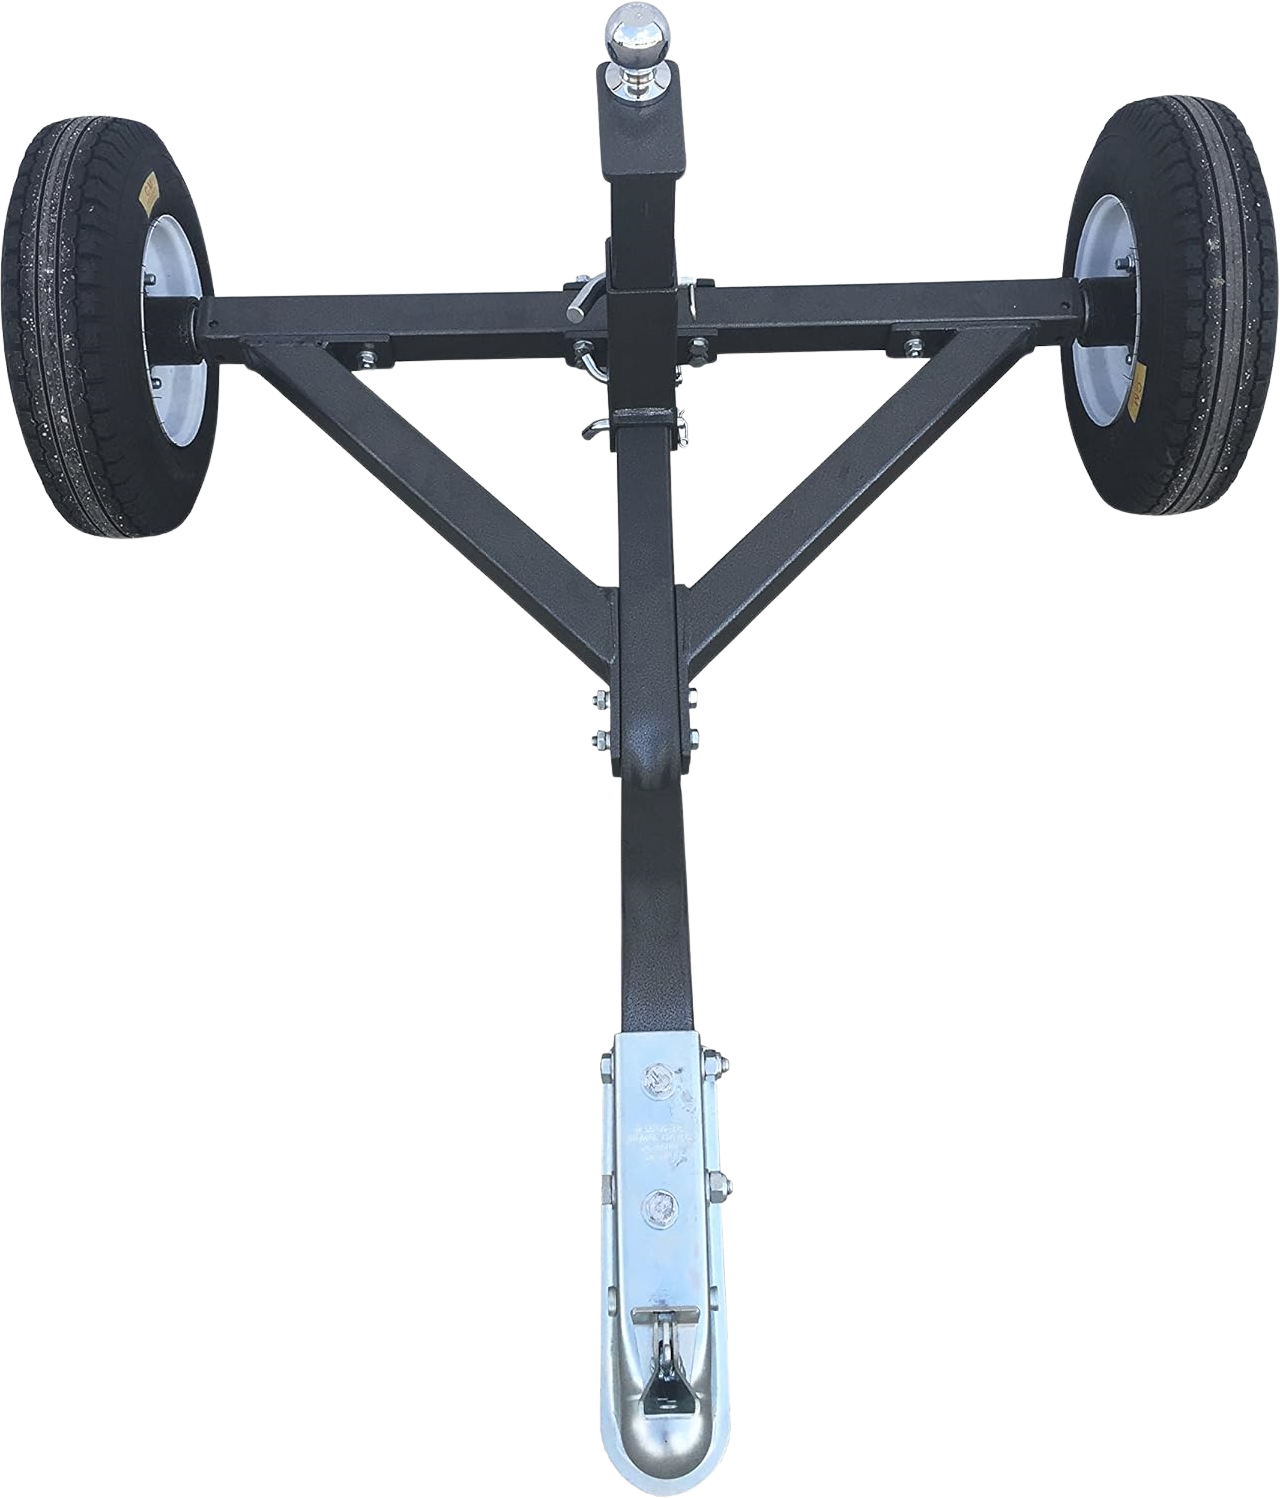 Tow Tuff, Tow Tuff TMD-1000ATV Trailer Dolly Adjustable 20" to 24.25" Max Weight 1000lbs 2" Coupler and Pin Hitch New